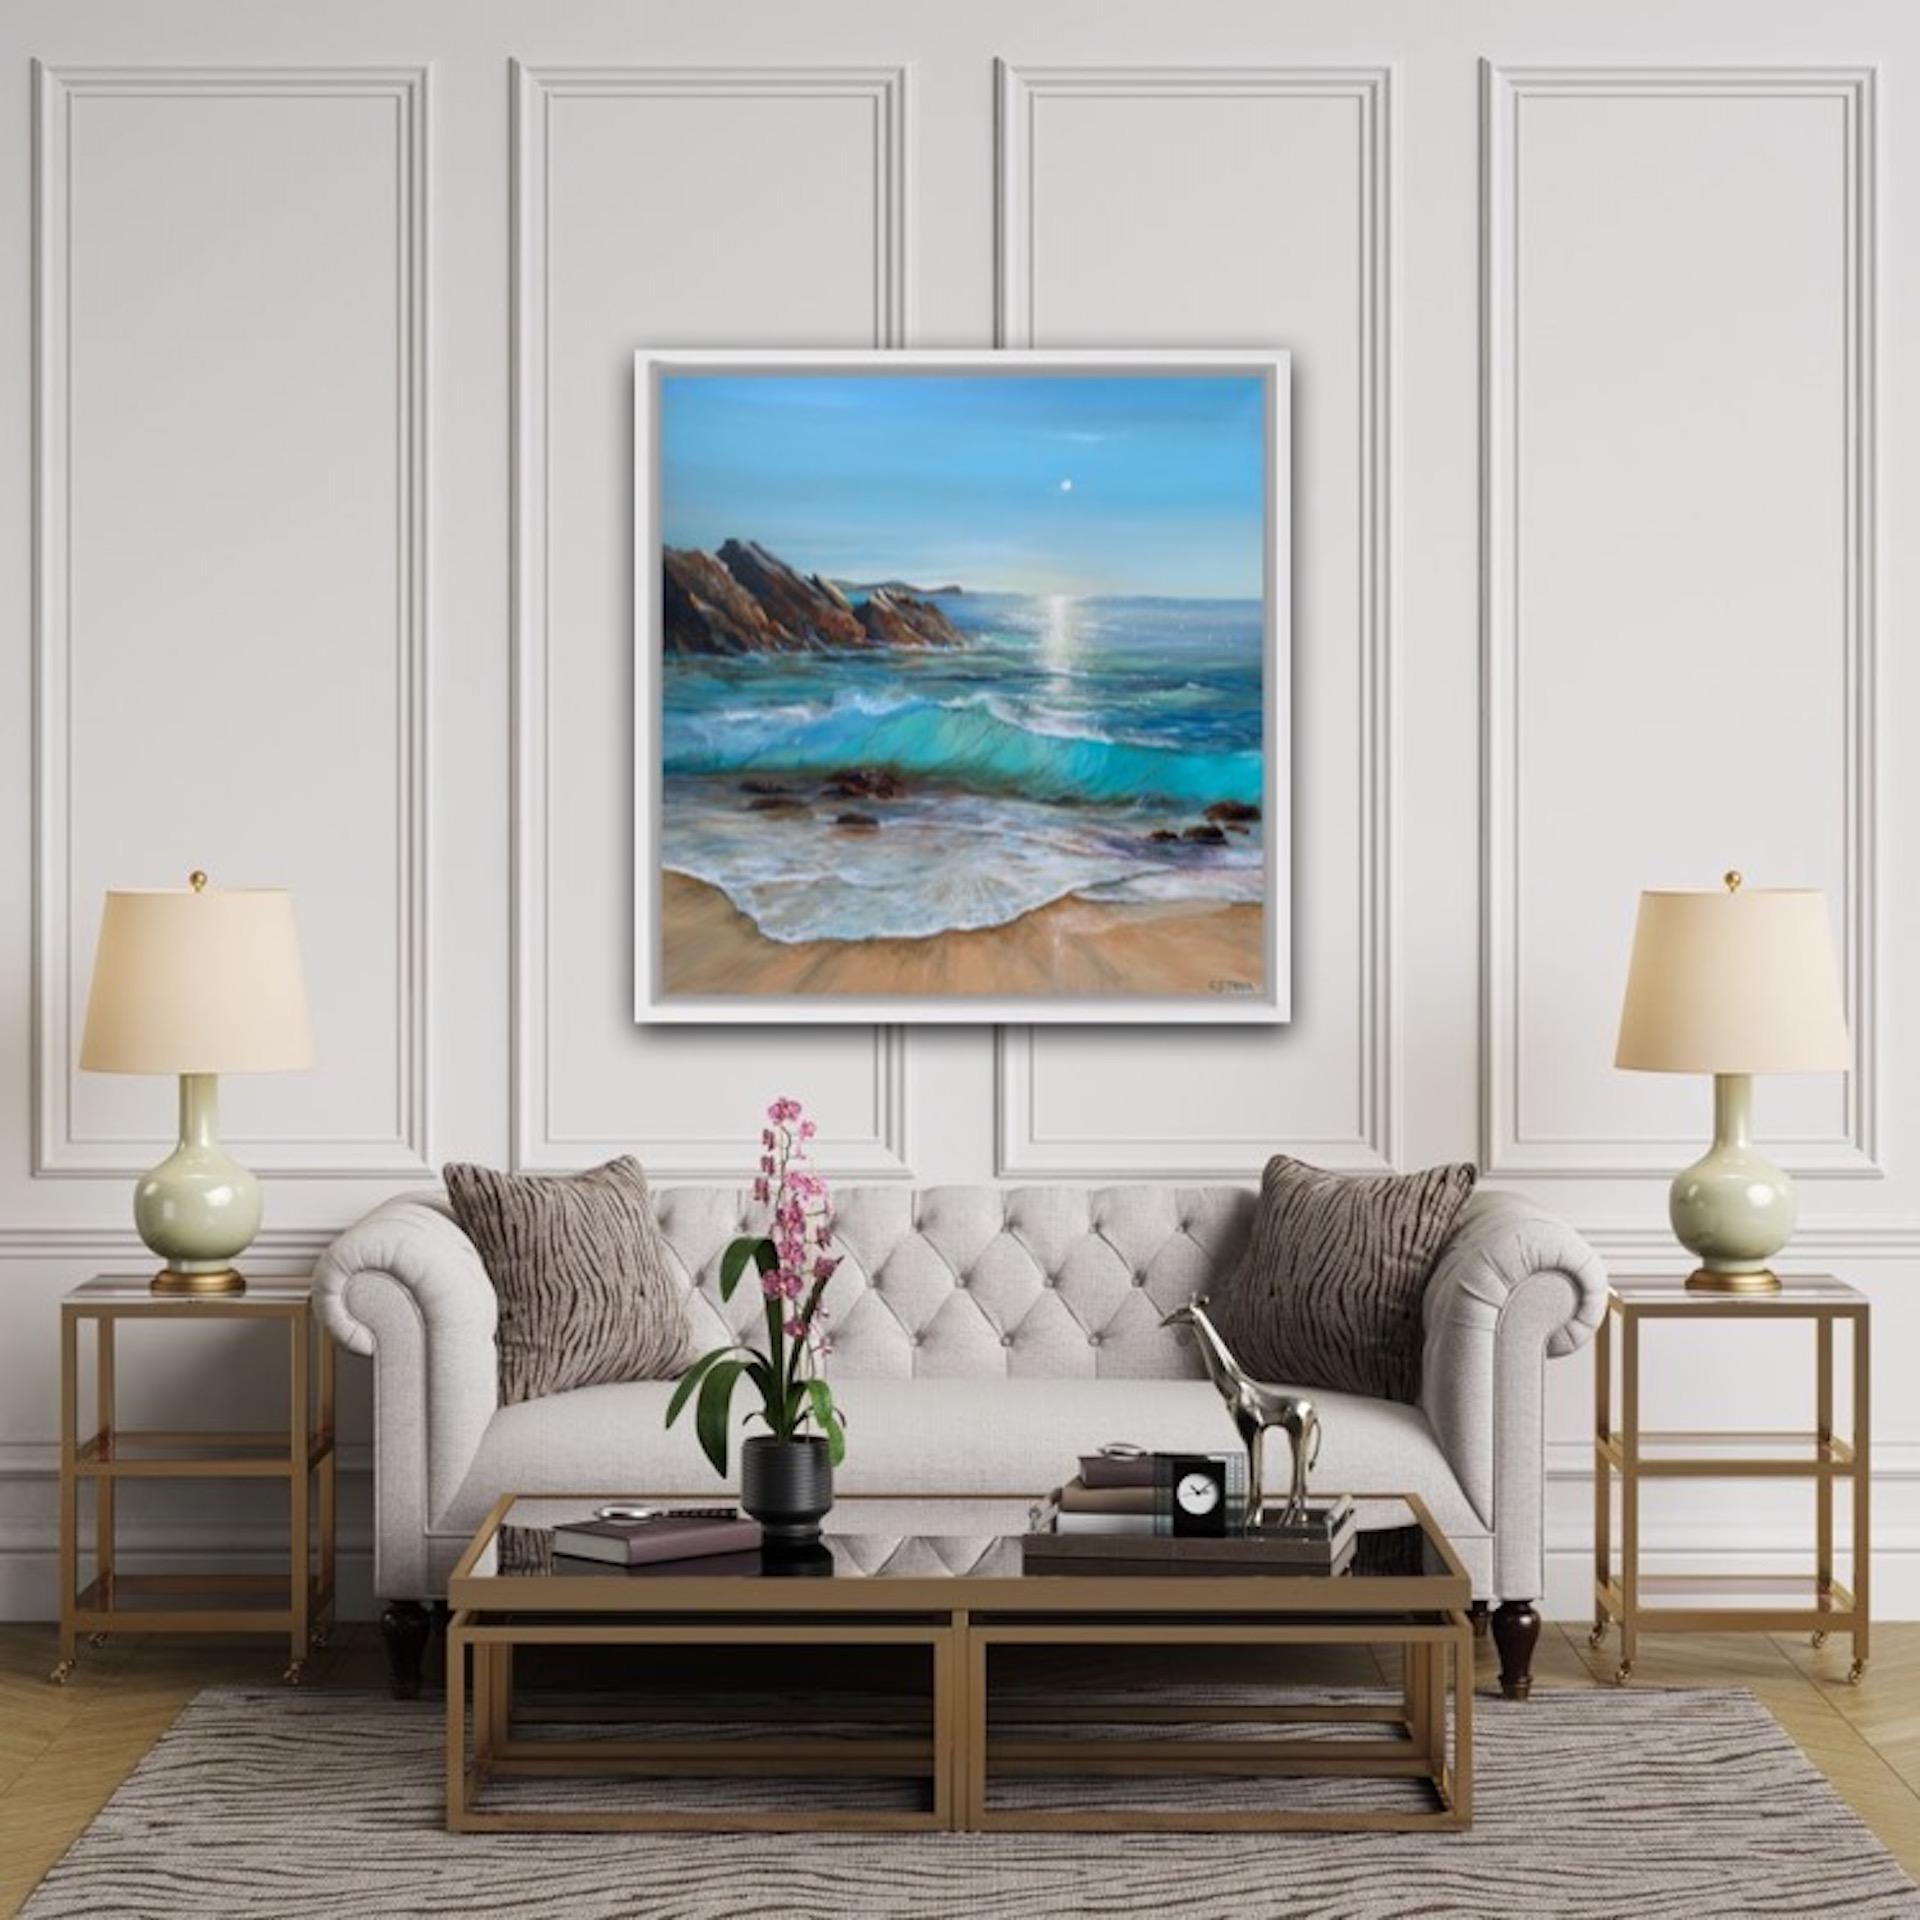 Carolyn Tyrer
Memories are made by the Sea
Contemporary Realist Seascape Painting
Acrylic Paint on Canvas
Canvas Size: H 80cm x W 80cm
Sold Unframed
Please note that insitu images are purely an indication of how a piece may look

Memories are made